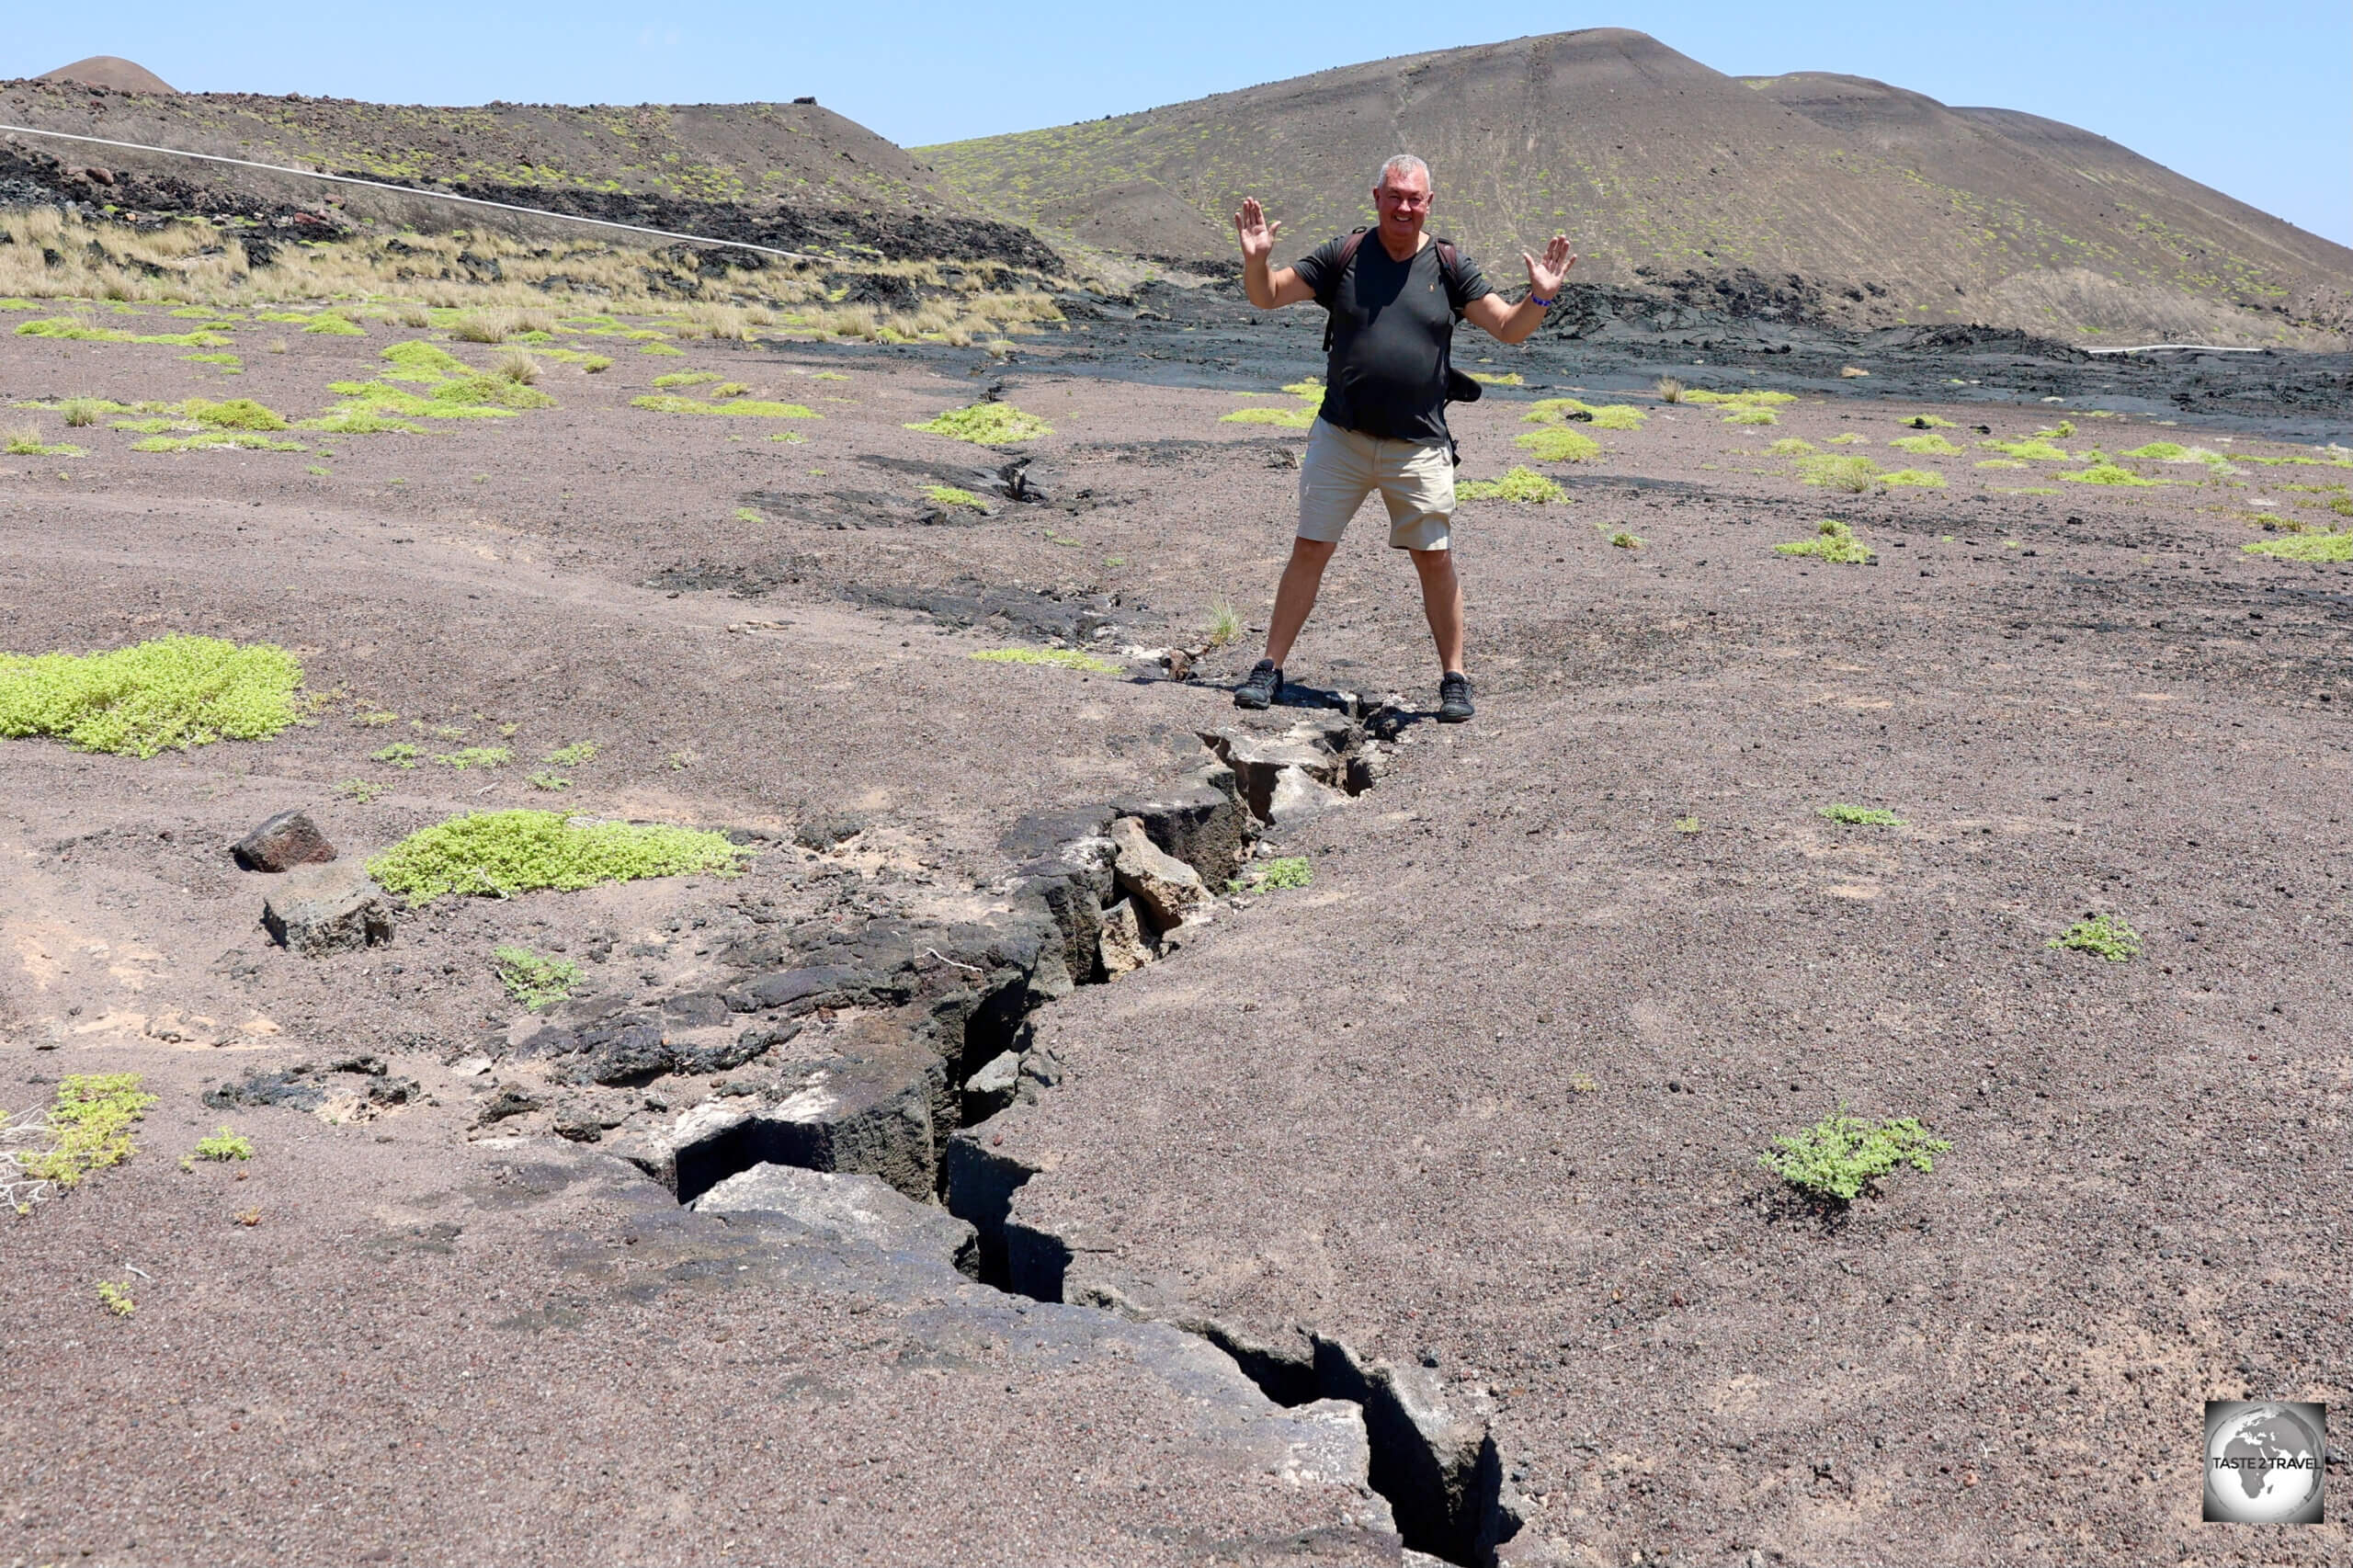 Straddling a tectonic divide with one foot on the Africa plate and one on the Arabian plate, one of many features in the vicinity of the Ardoukoba volcano.